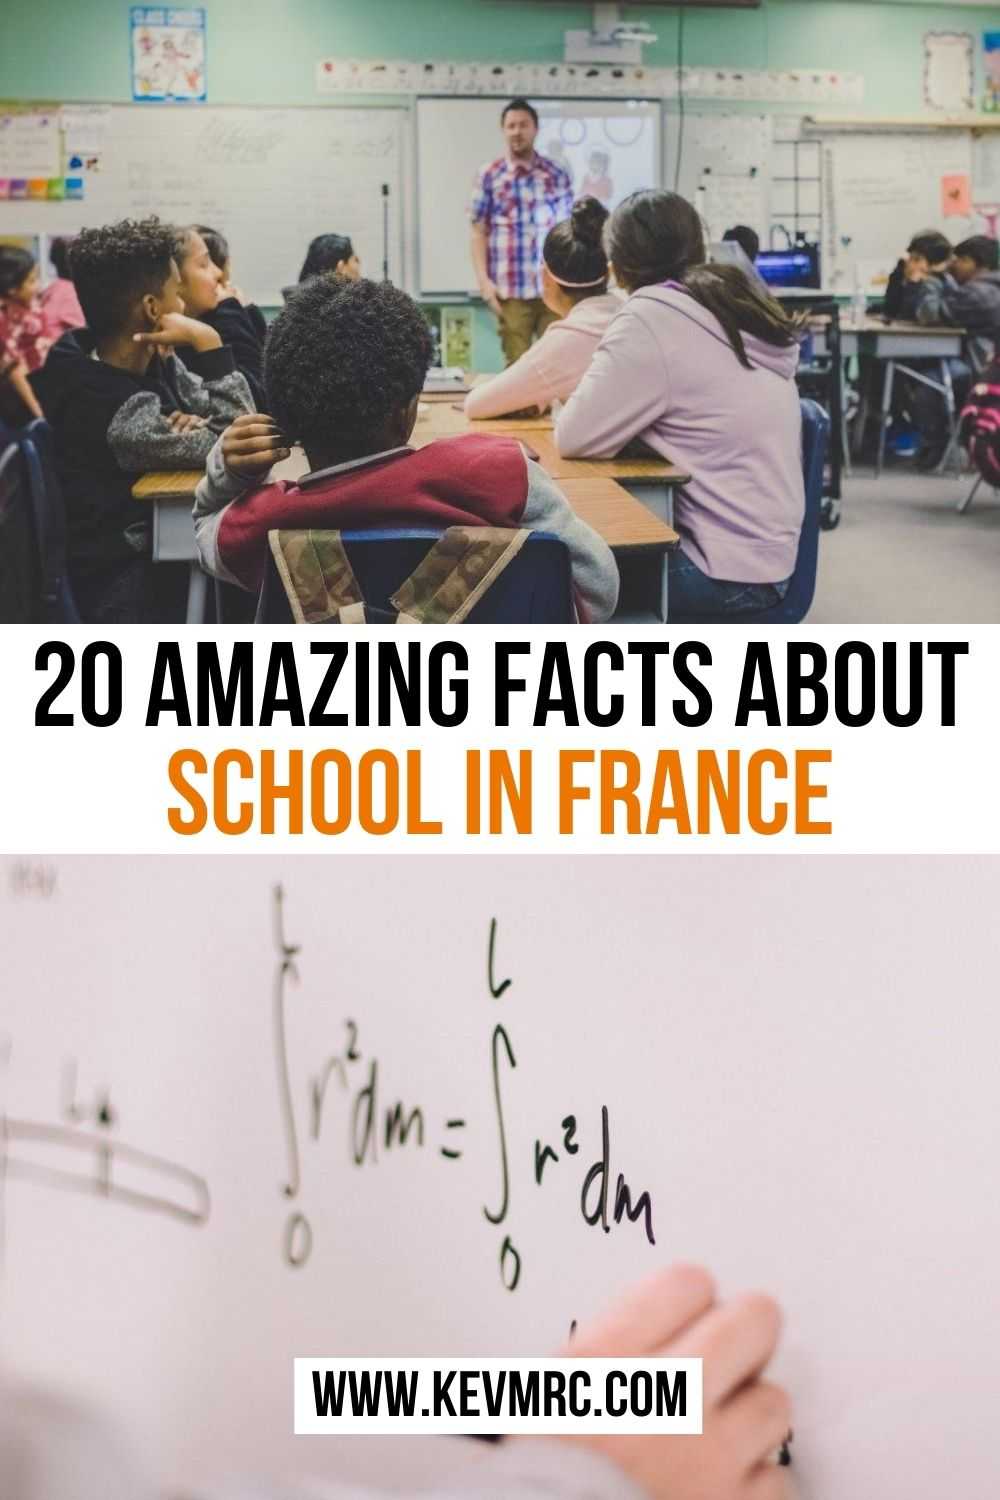 Did you know that French students have 2 months of holidays in summer? Or that education in France is almost free? Discover more through these 20 interesting facts about French schools!